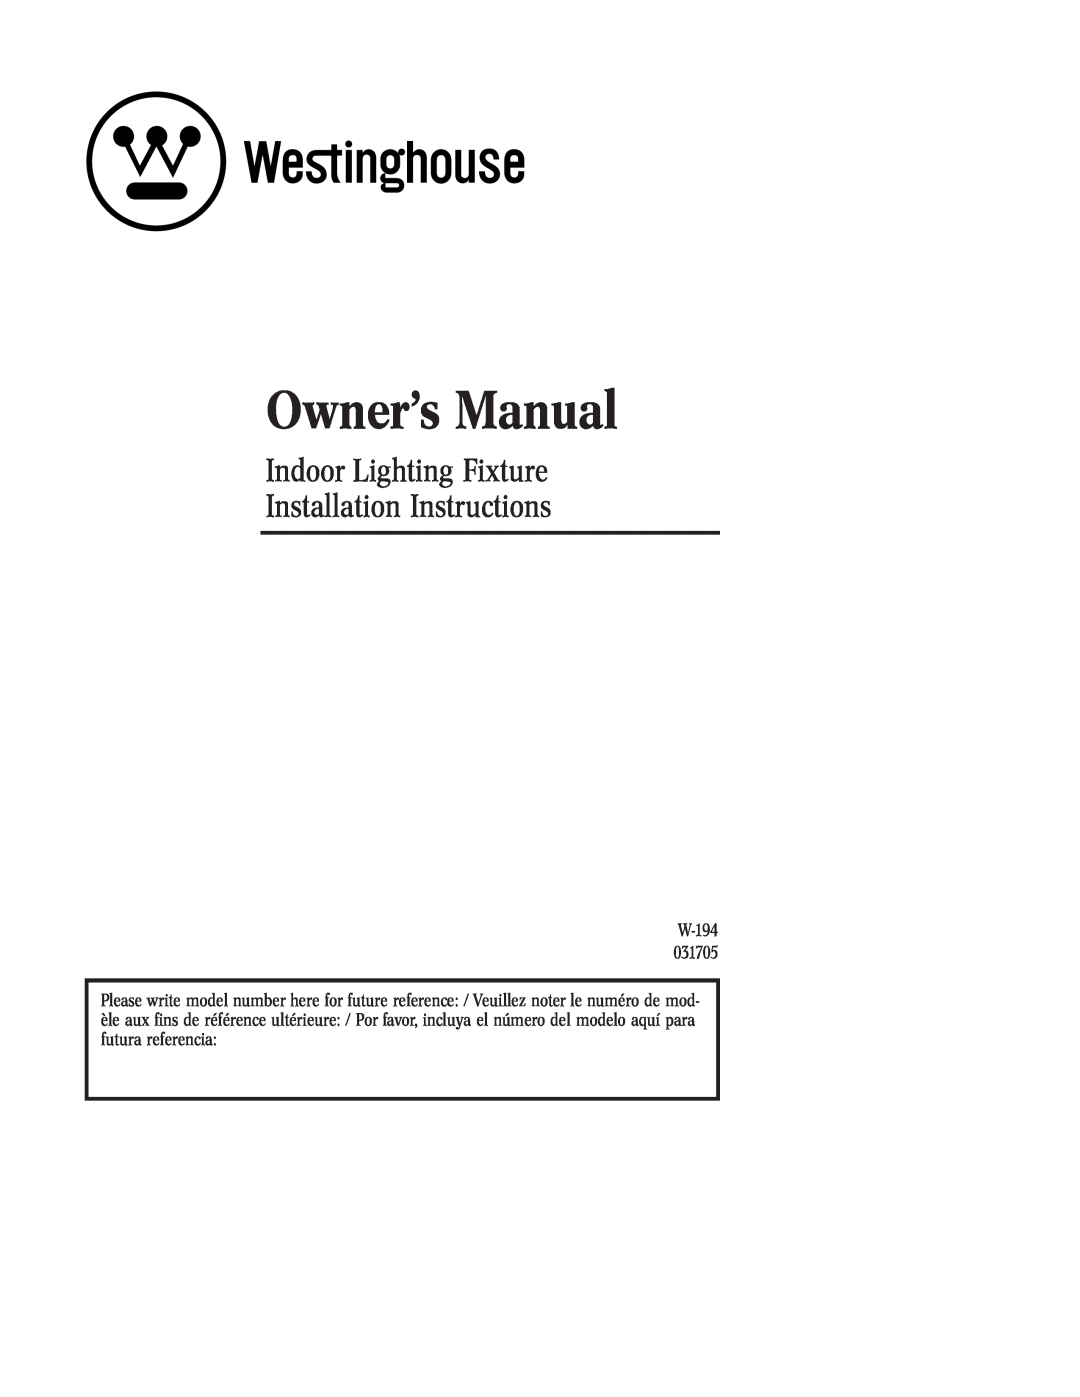 Westinghouse 31705, W-194 owner manual Indoor Lighting Fixture Installation Instructions 